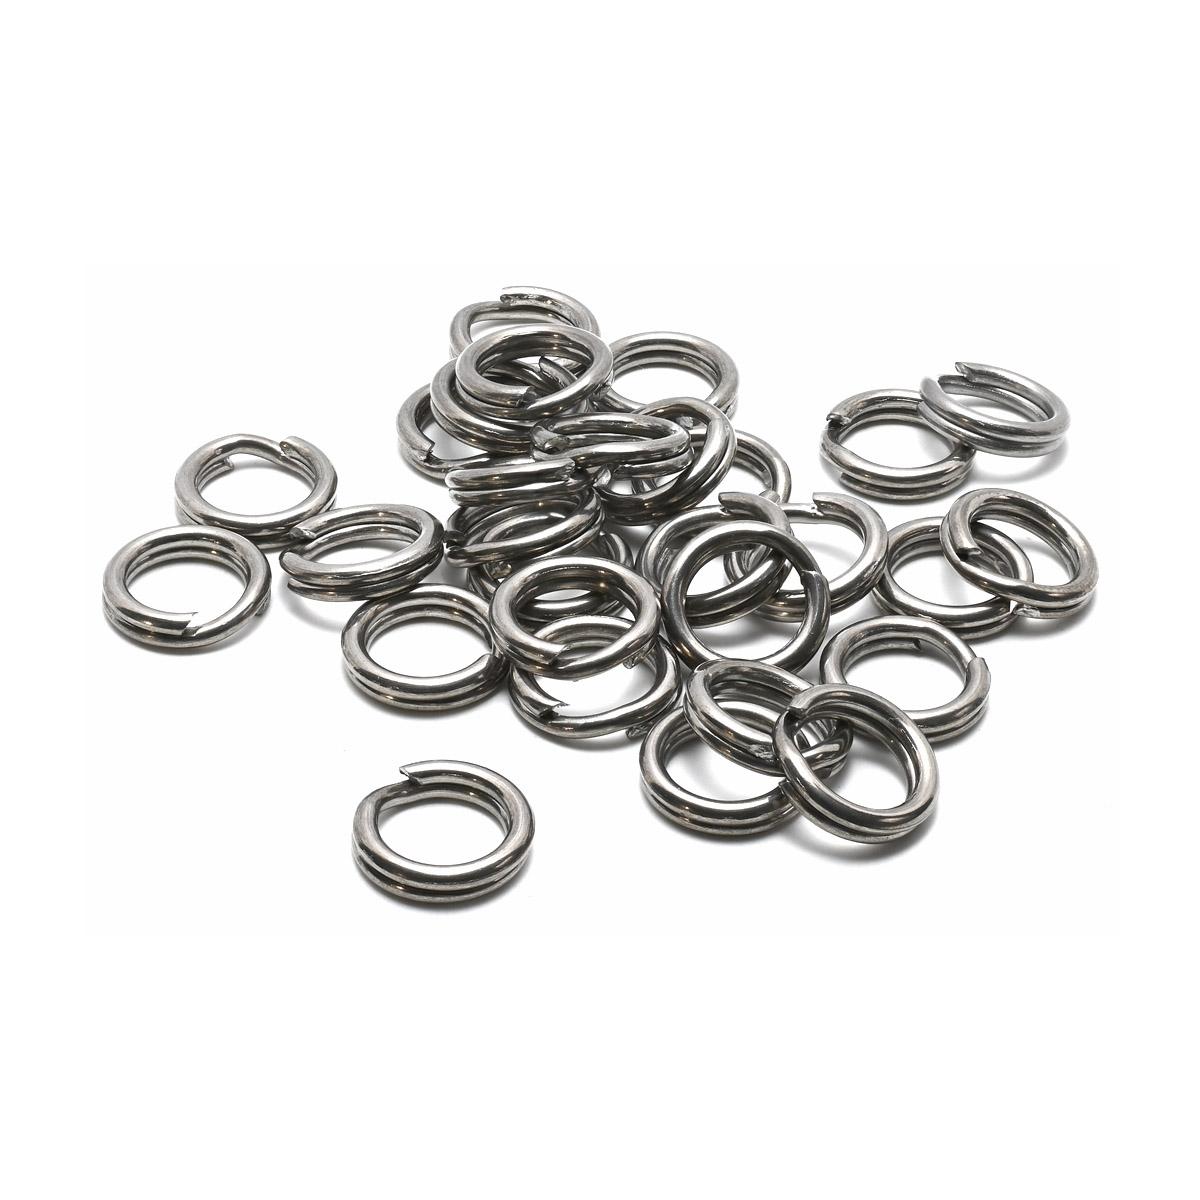 1000 Count SIZE #6 Stainless Steel Split Rings Bulk MADE IN USA Fishing Tackle 